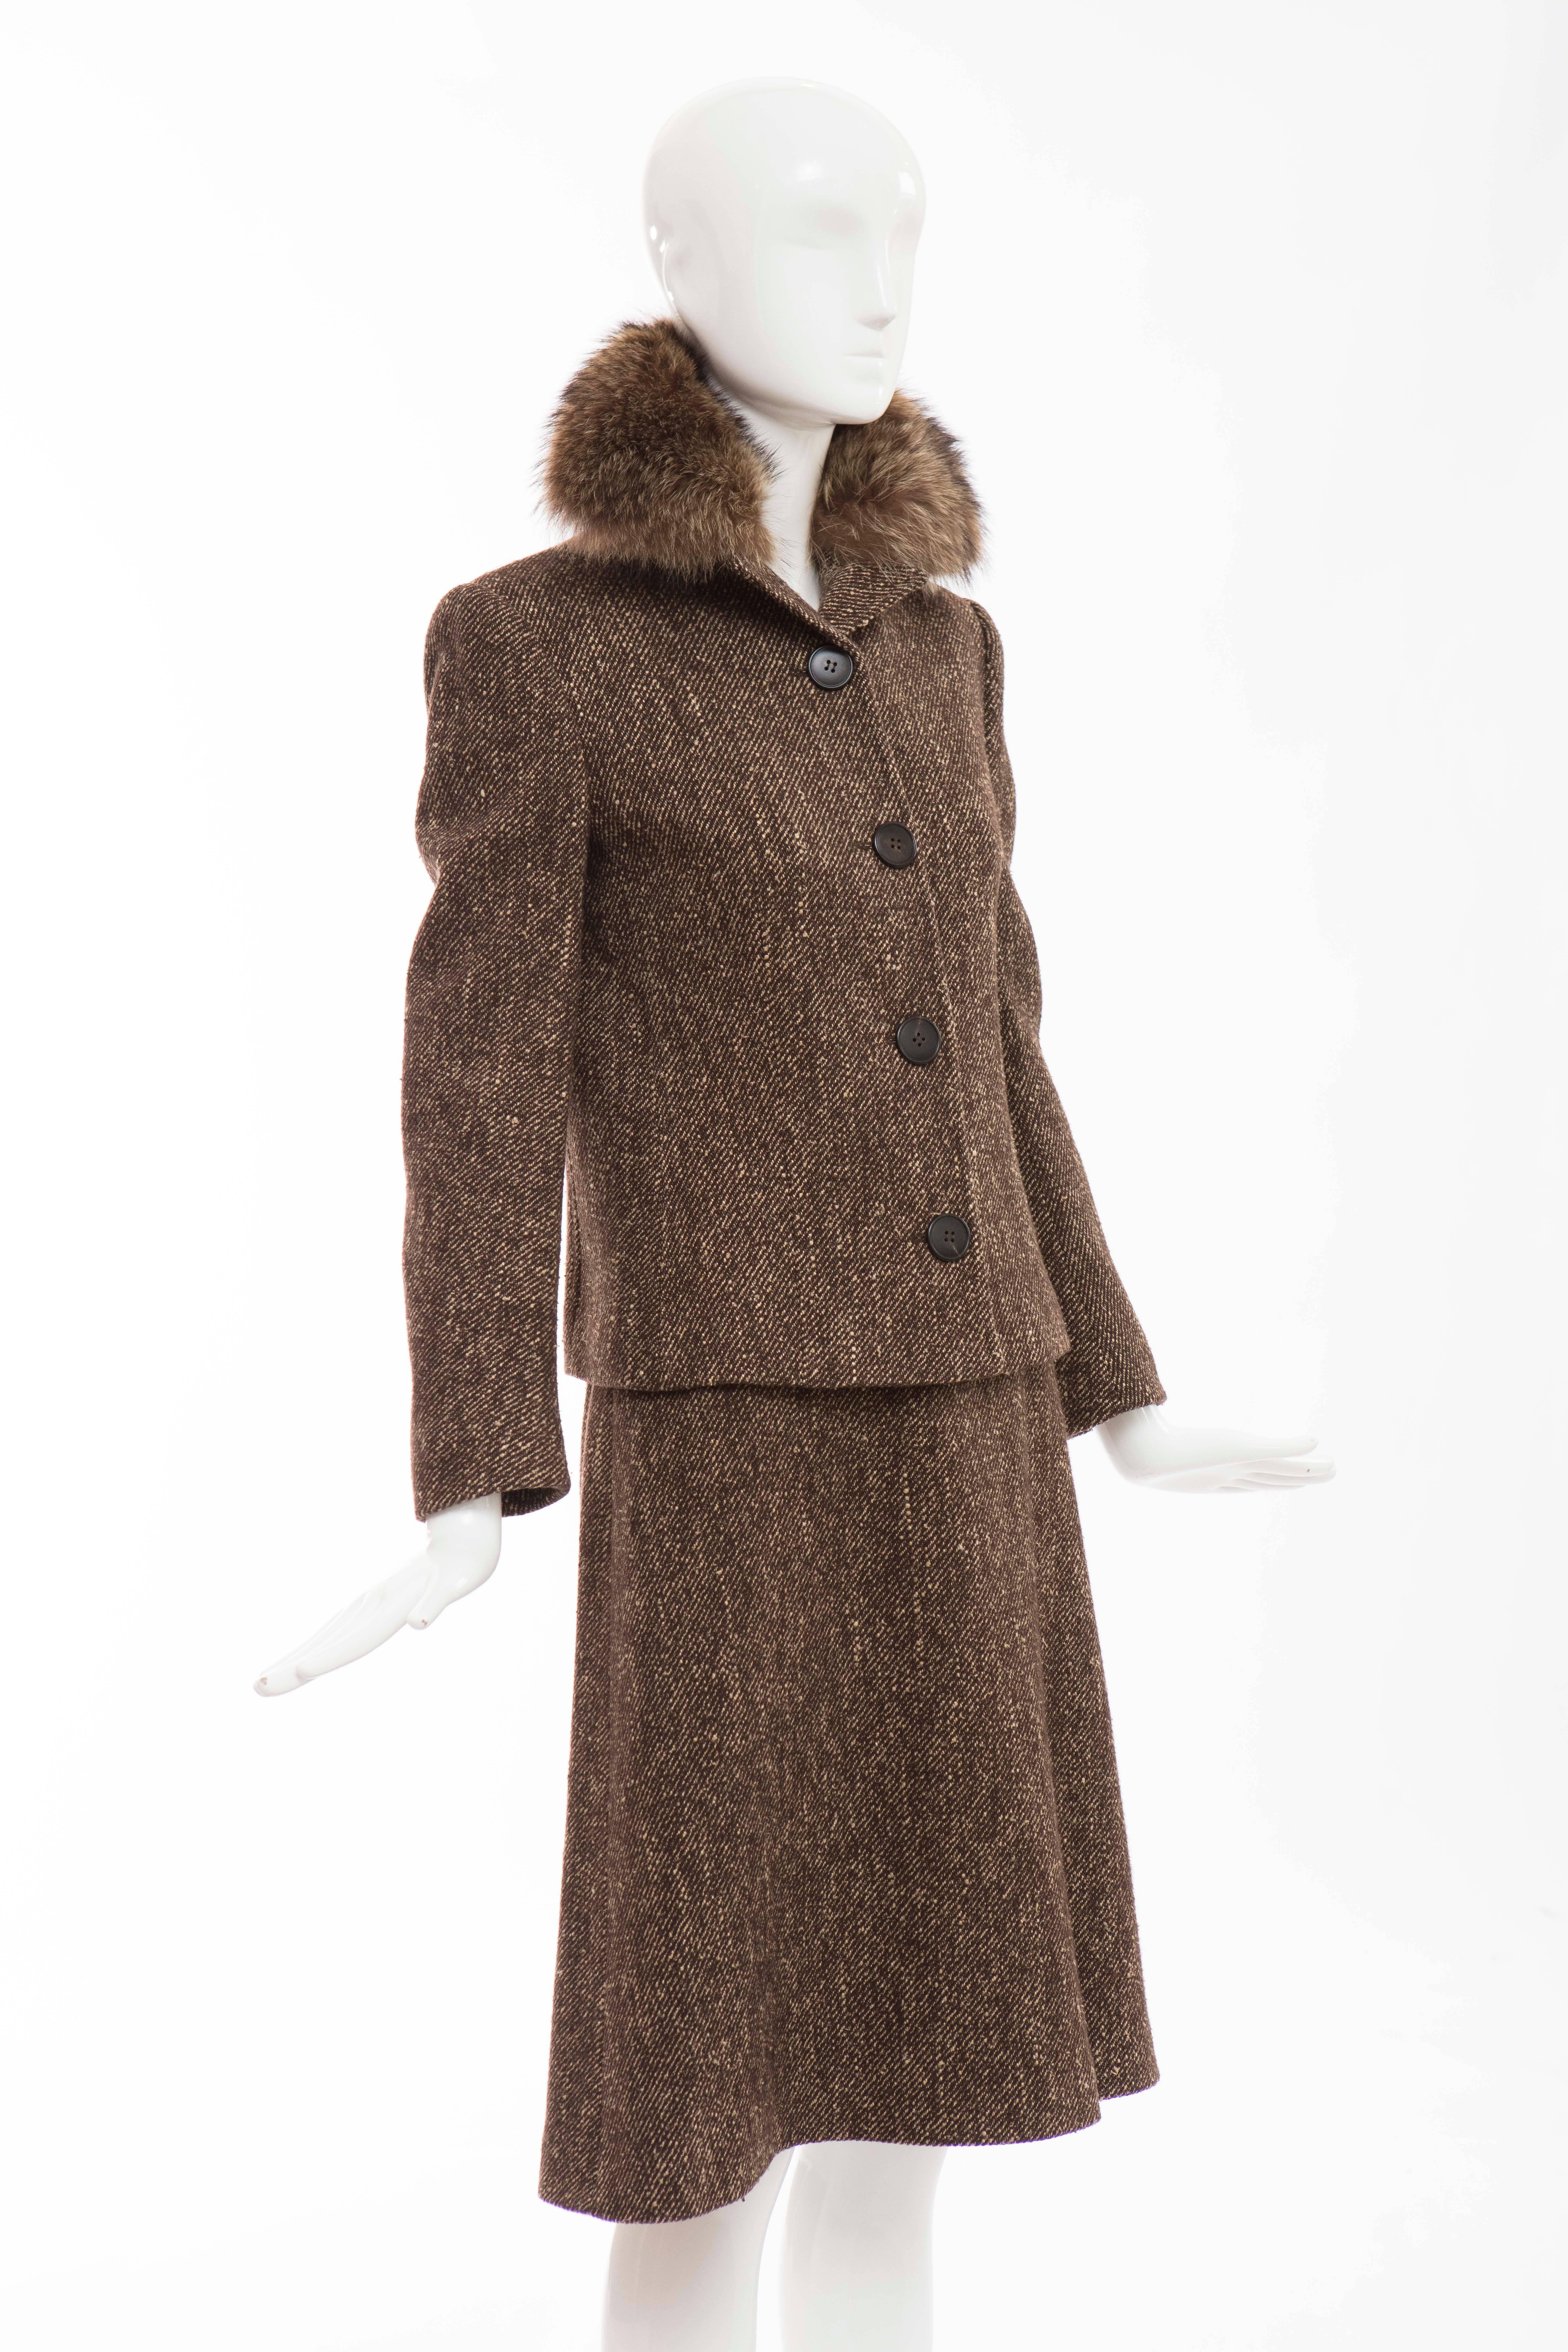 Gray Dolce & Gabbana Brown Tweed Skirt Suit With Fur Collar For Sale